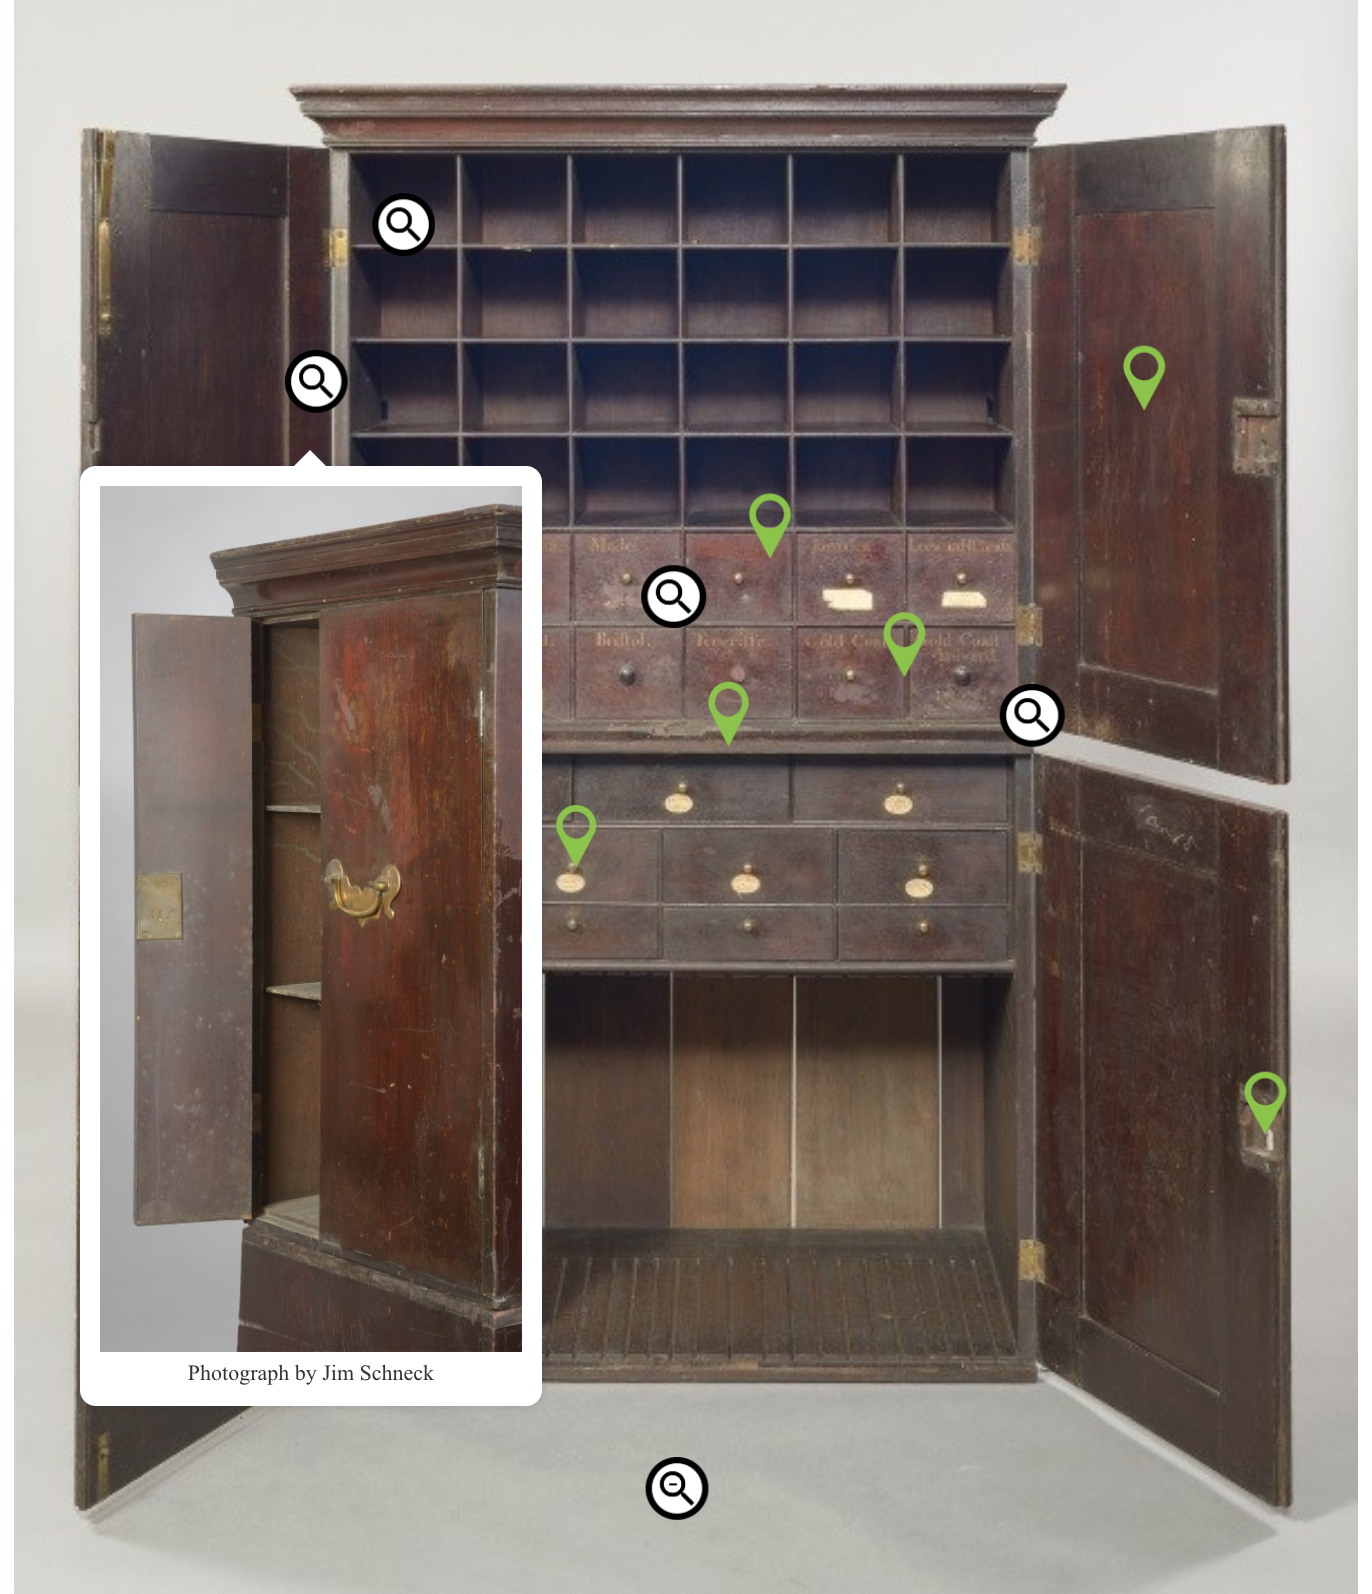 An example of the type of pop-up created by the touch screen interactive of a picture of a side compartment on the cabinet, obscured when the cabinet's doors are fully open.